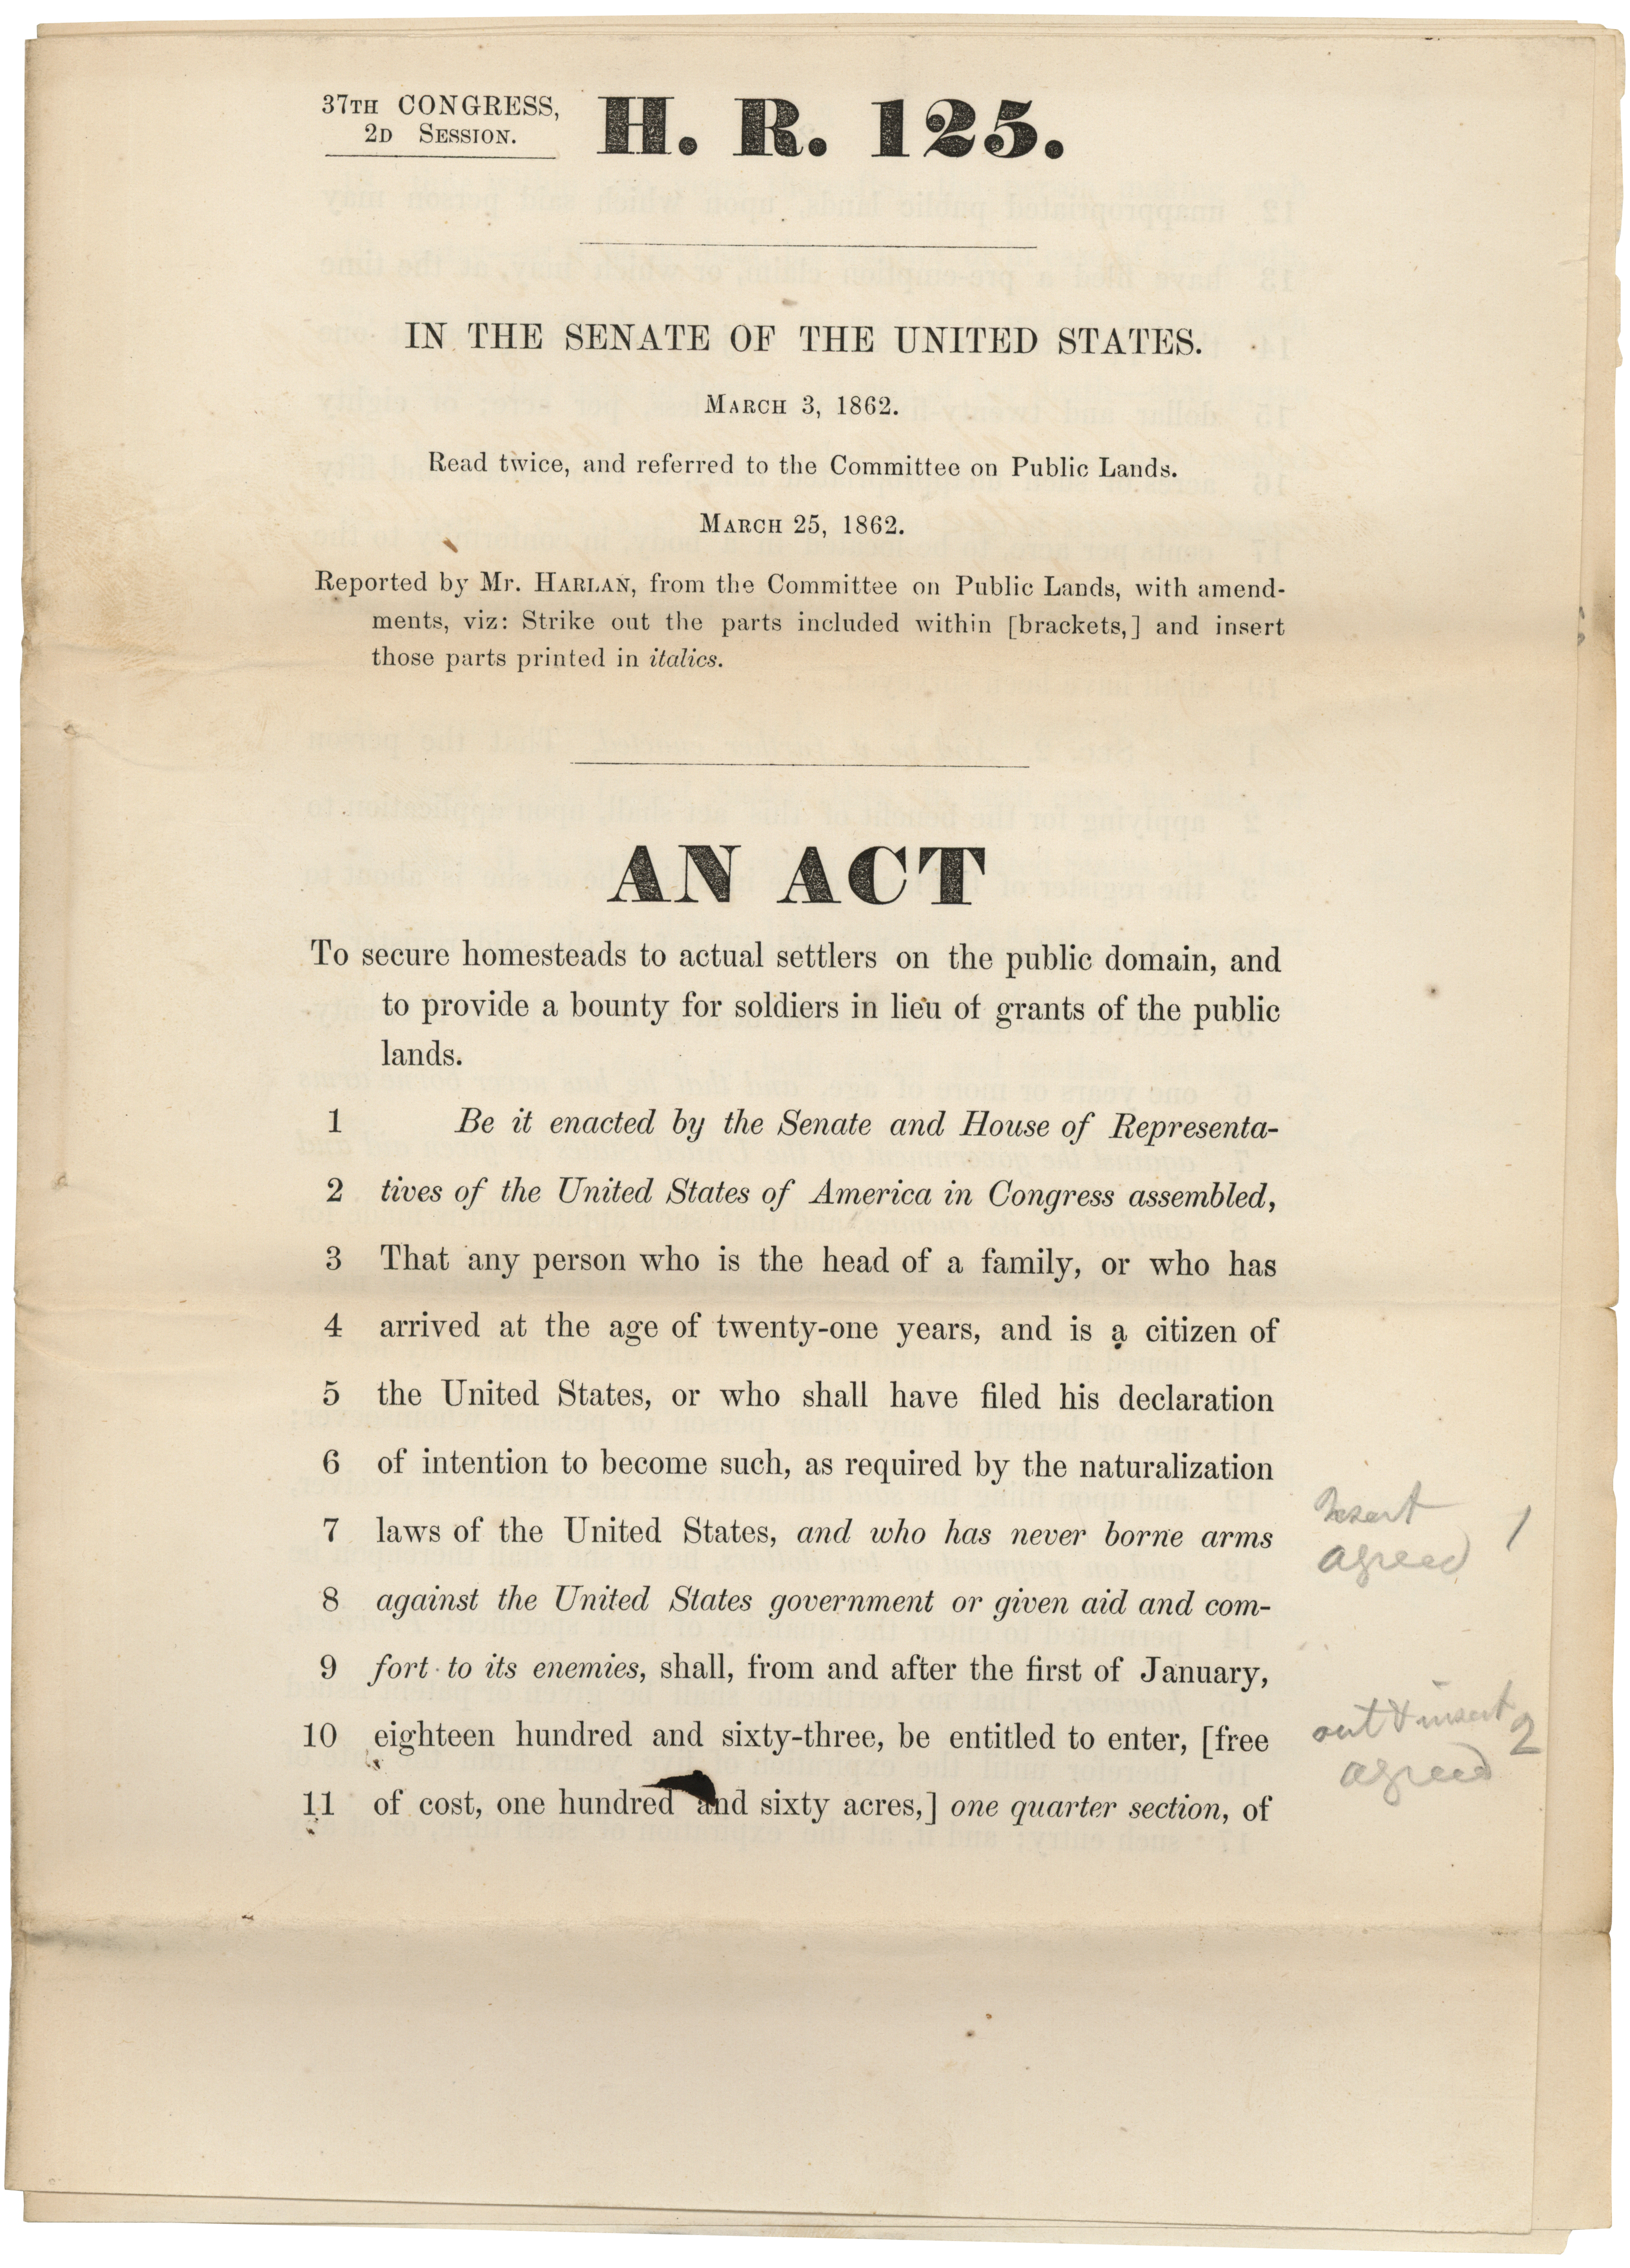 The Homestead Act May 20 1862 National Archives